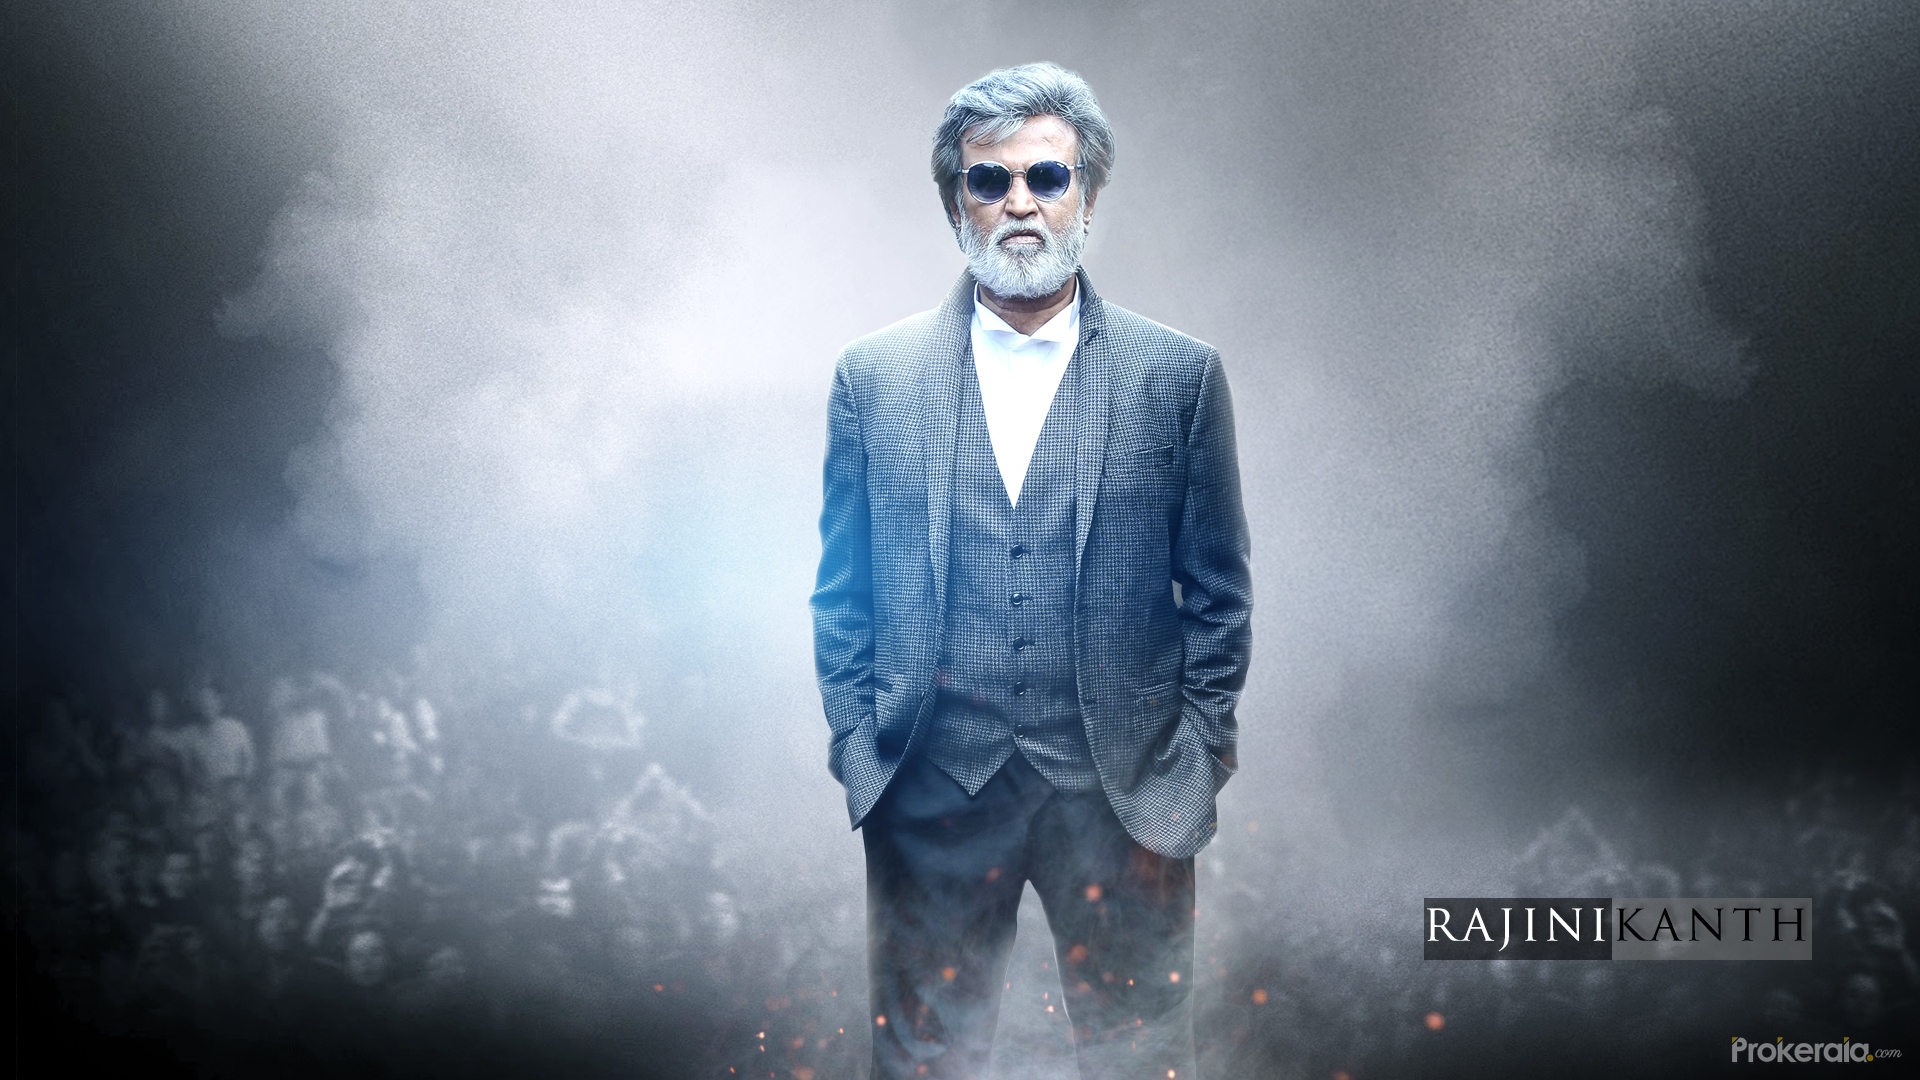 kabali hd wallpapers 1080p,suit,photography,beard,fictional character,formal wear